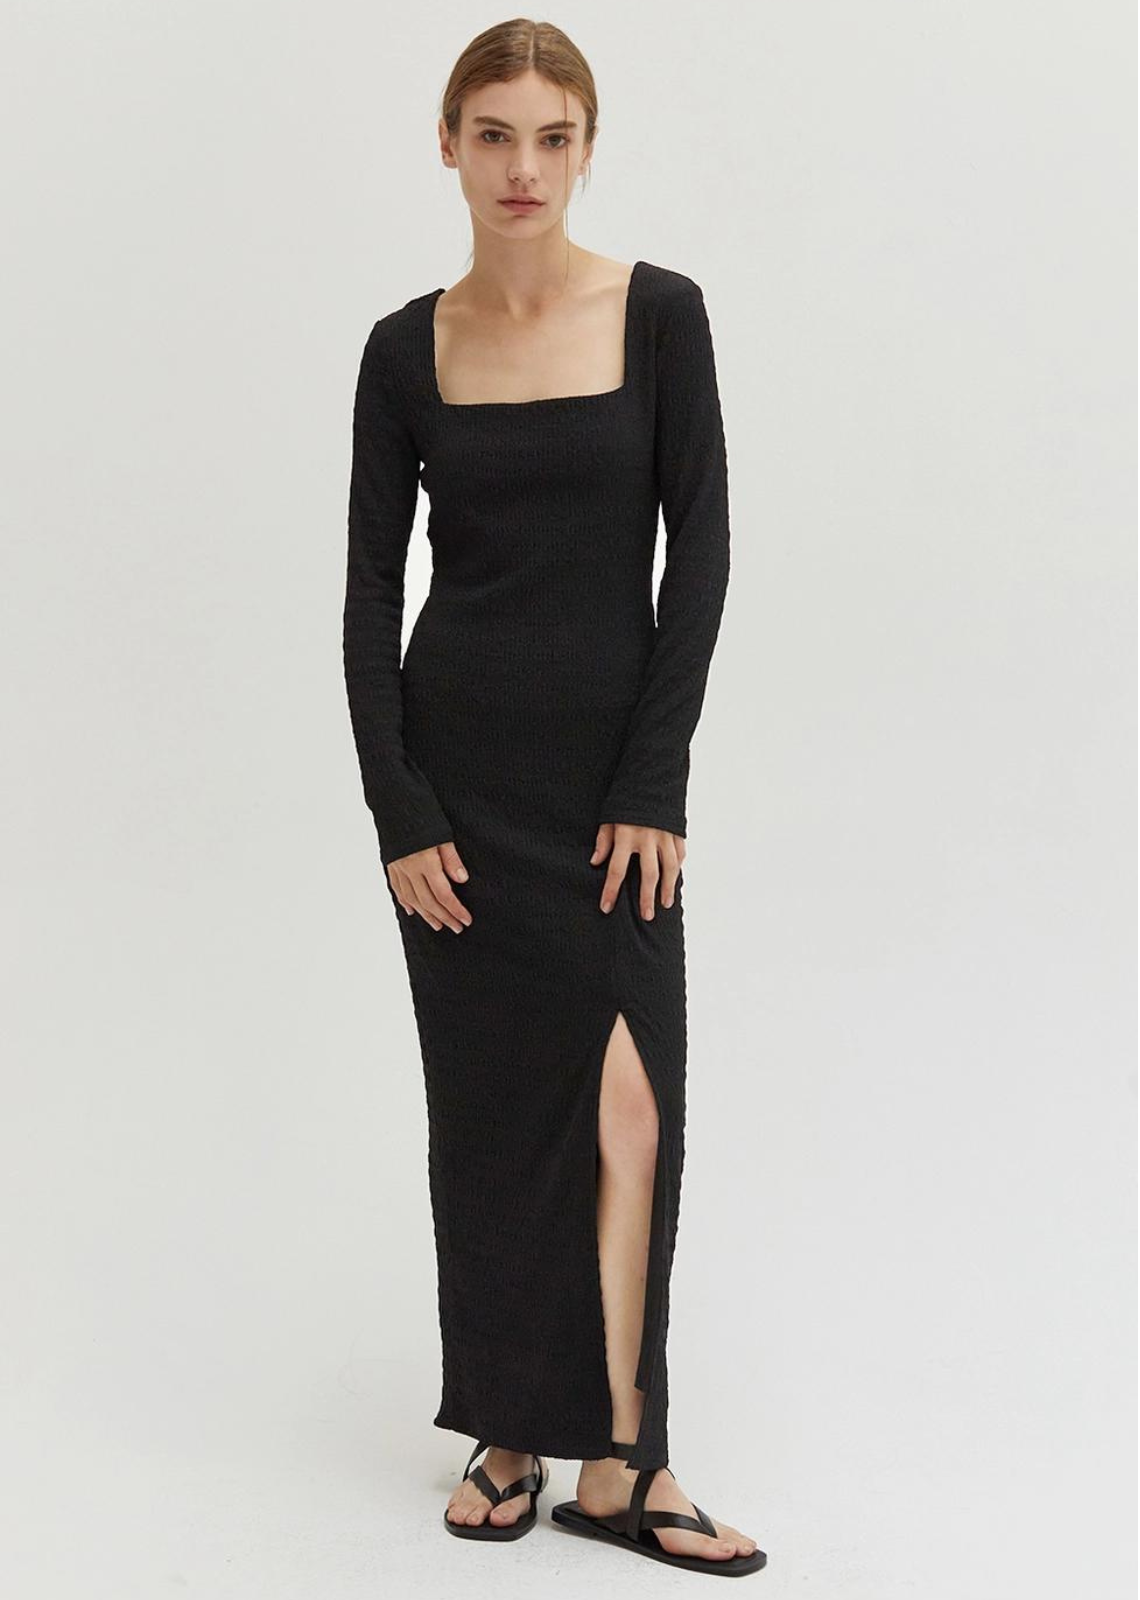 Irene Square Neck Textured Maxi Dress. A square neck maxi dress with an open side slit. 